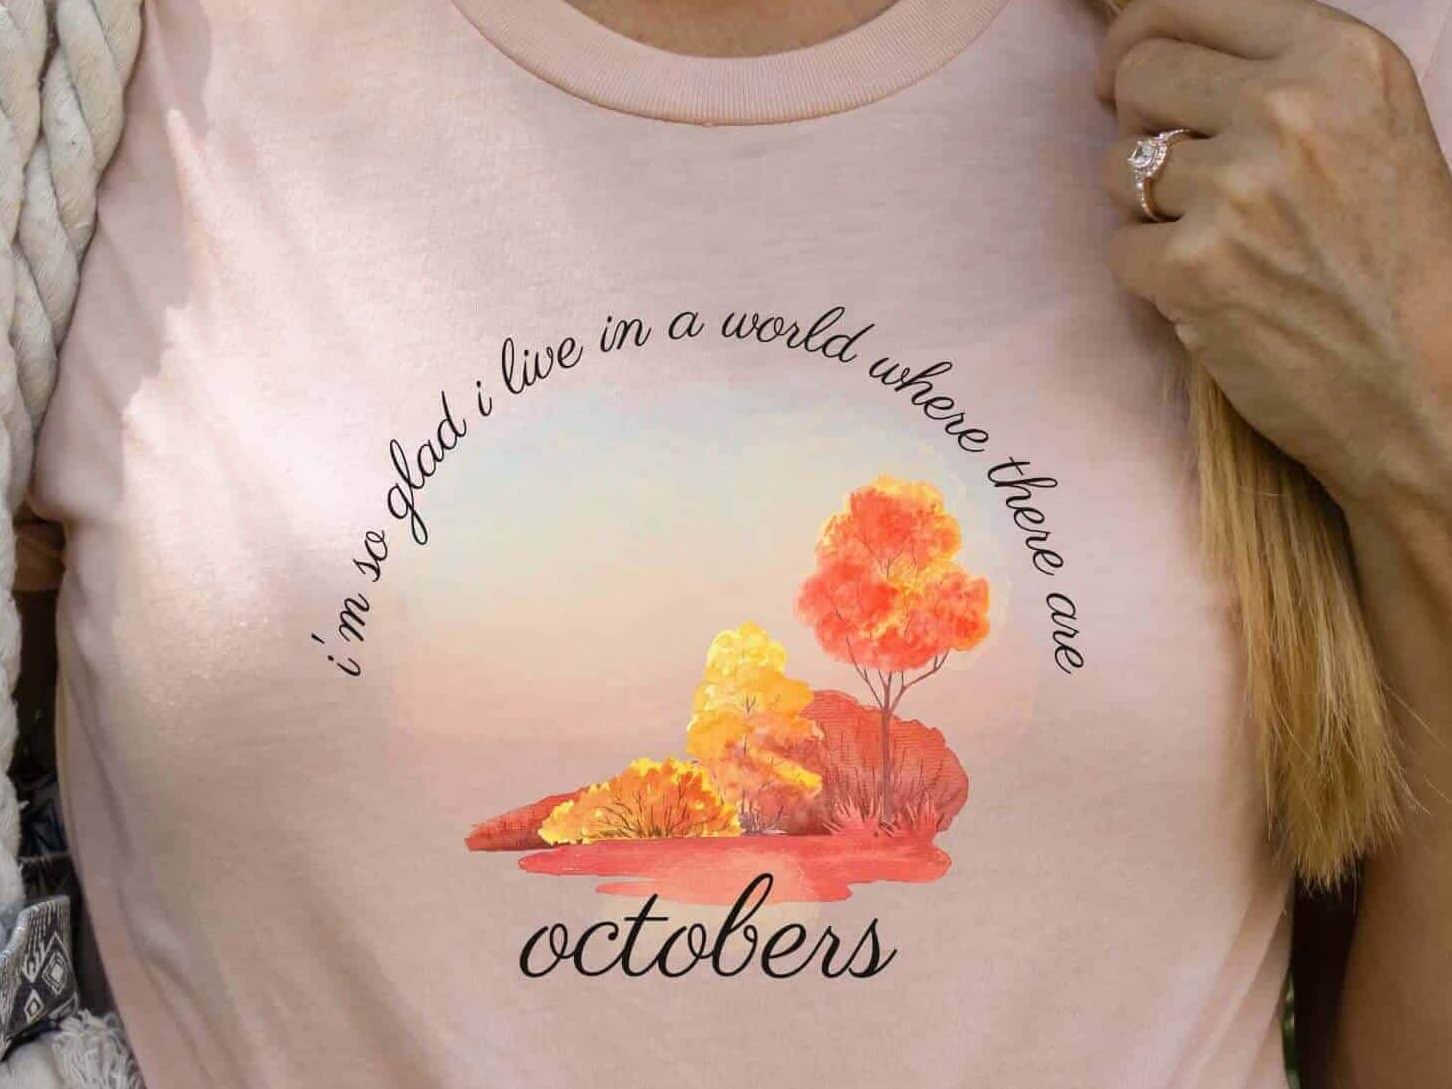 Woman wearing a peach colored shirt with the quote, I'm so glad I live in a world where there are Octobers from Anne of Green Gables.